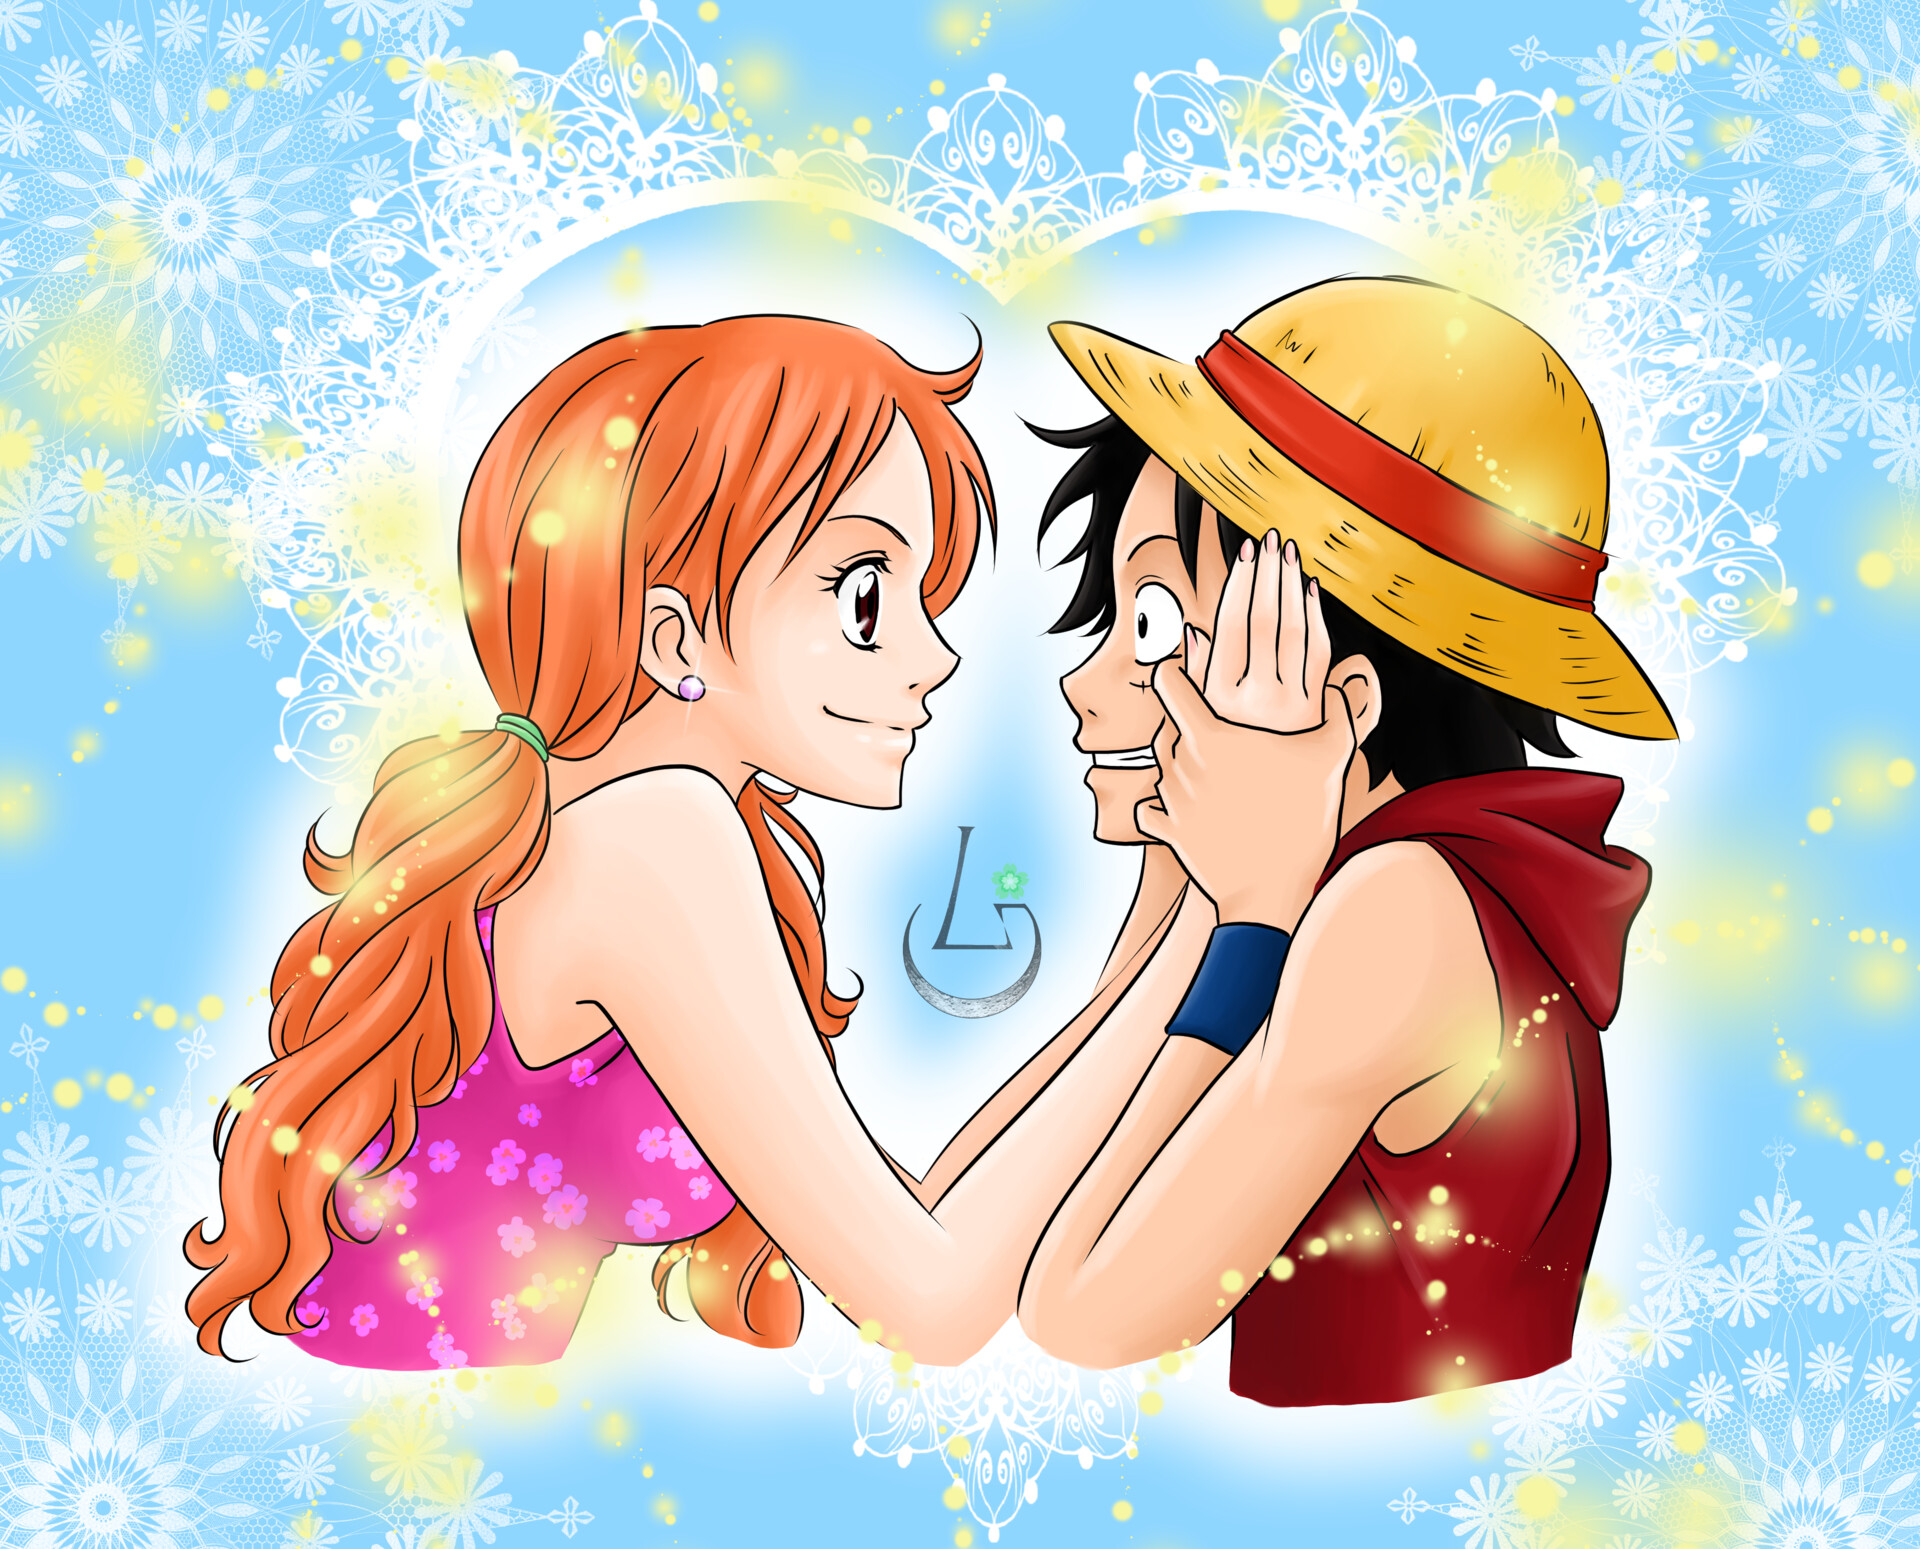 Fan art of Nami and Luffy from the manga and anime "One Piece" by...